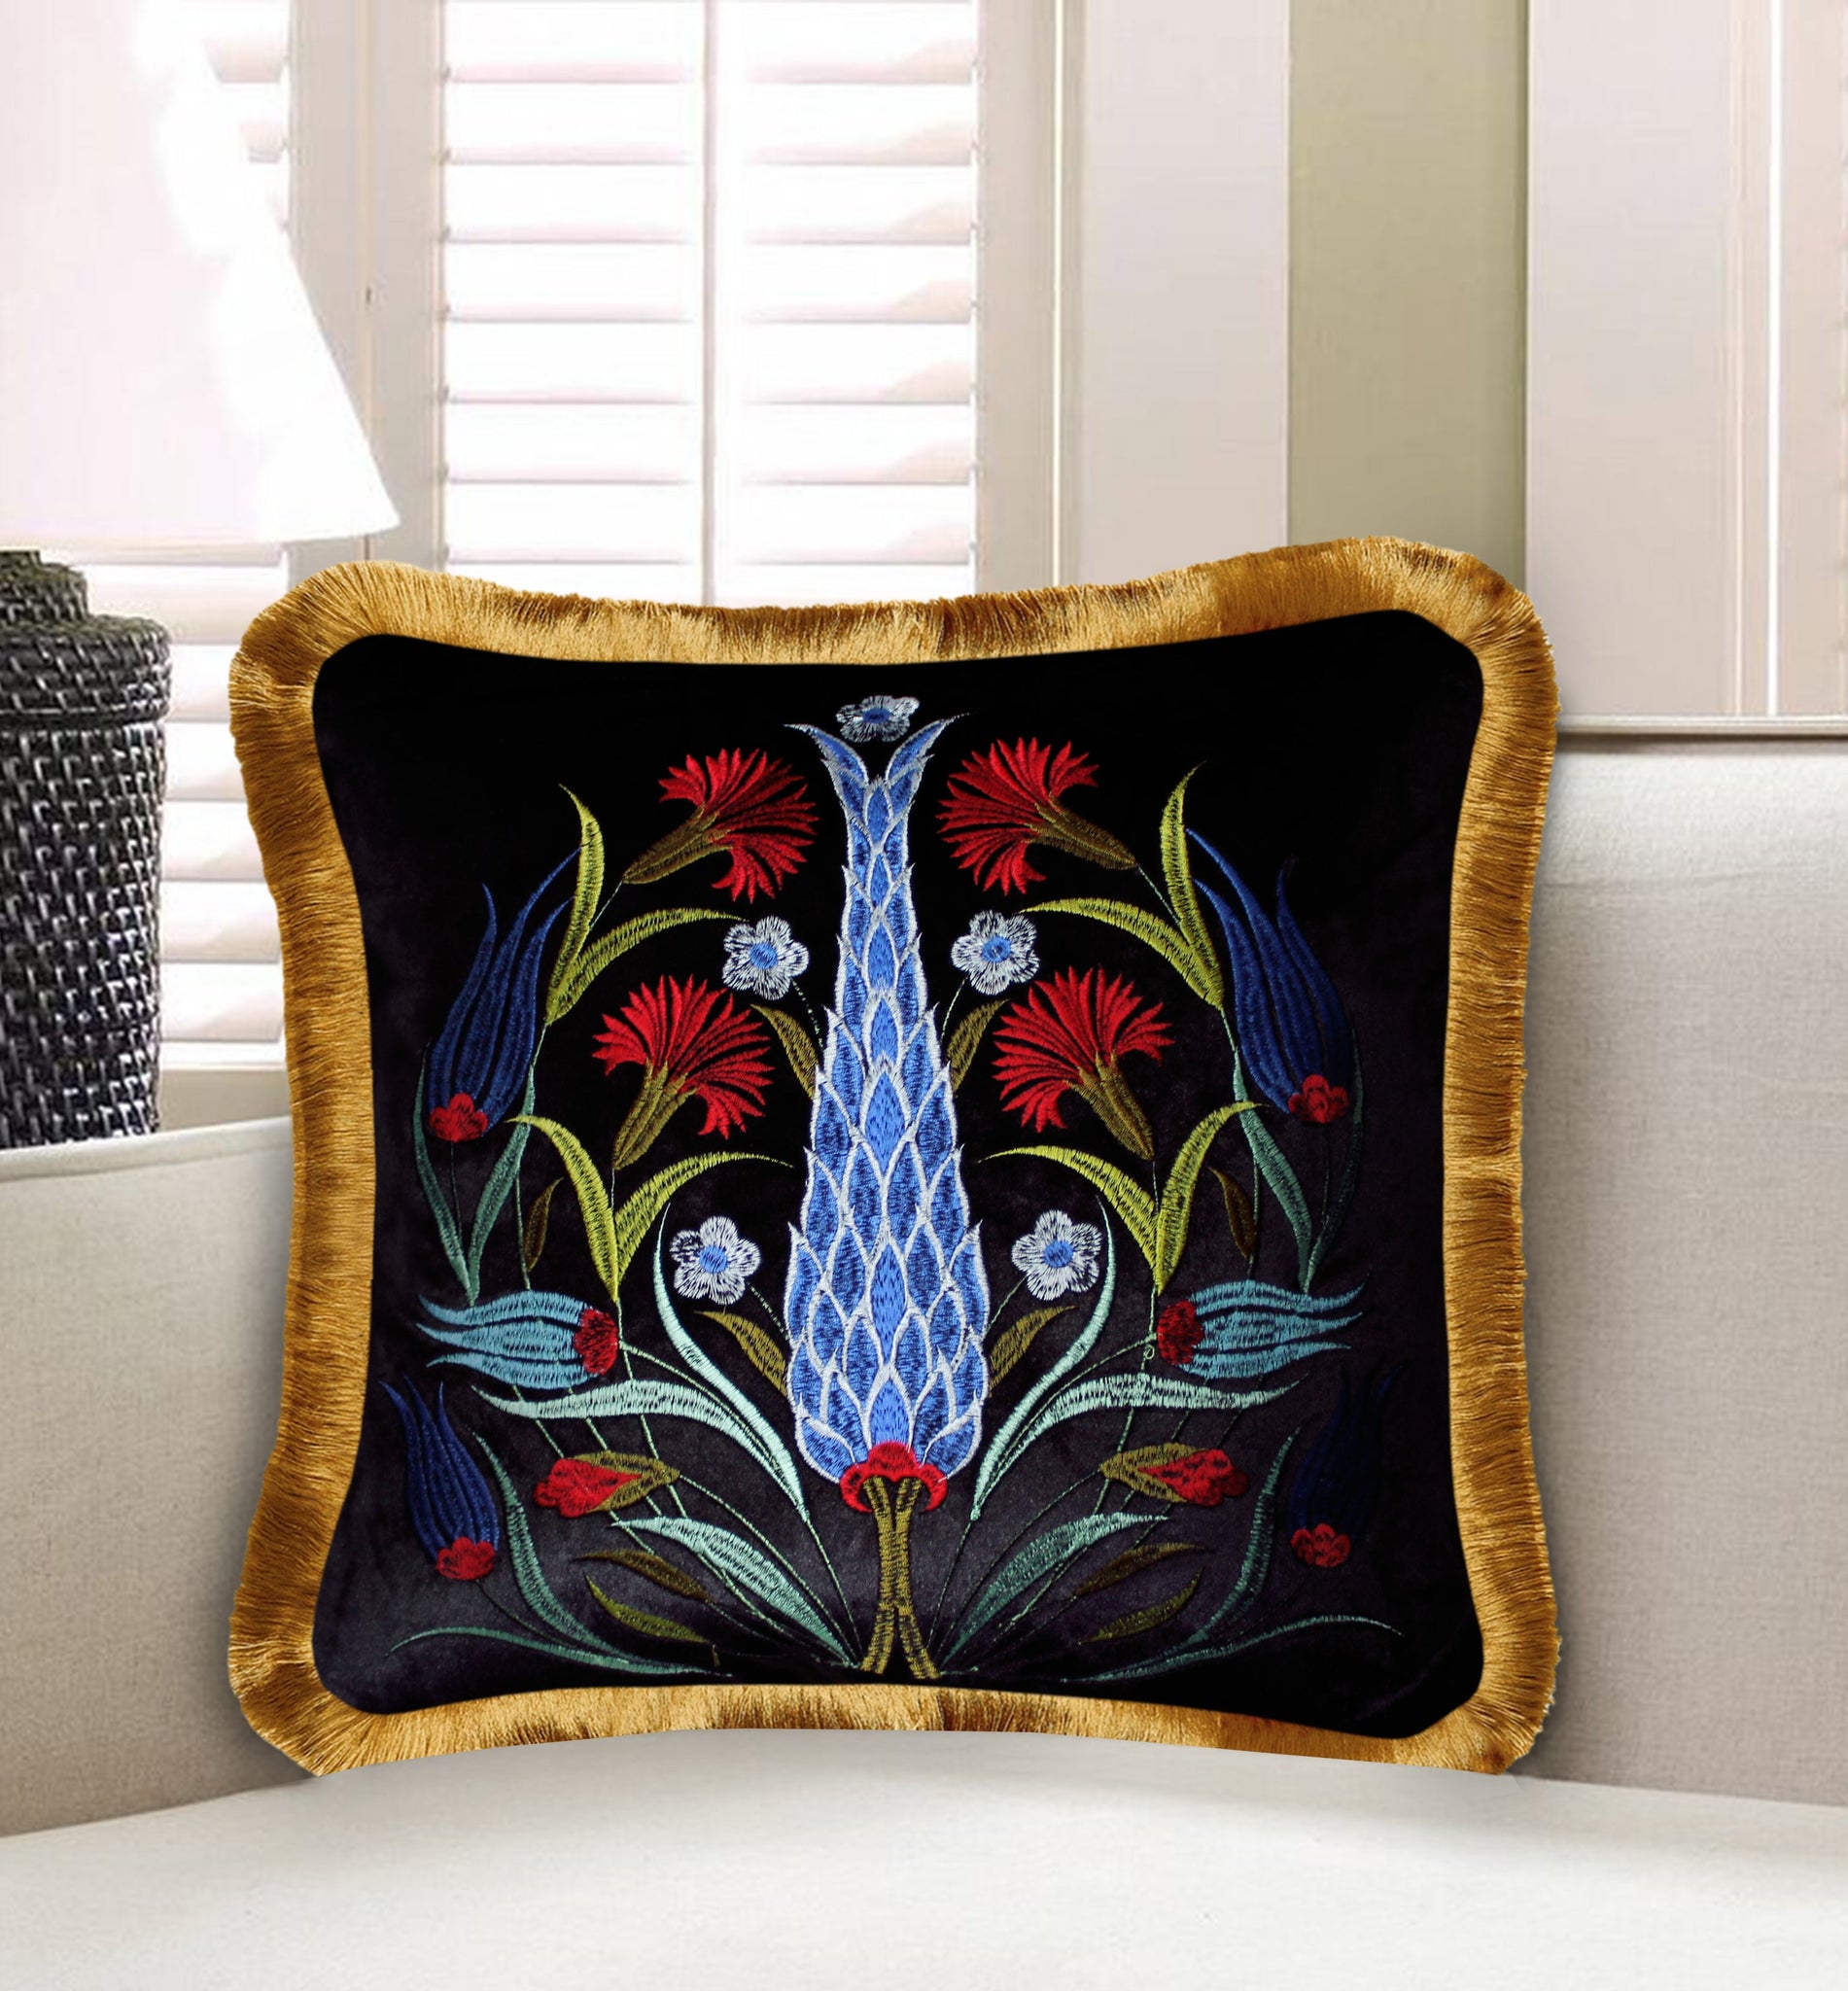 Black Velvet Cushion Cover Abstract Rose Bouquet Embroidery Decorative Pillow Modern Home Decor Throw Pillow for Sofa Chair Living Room 45x45 cm 18x18 In